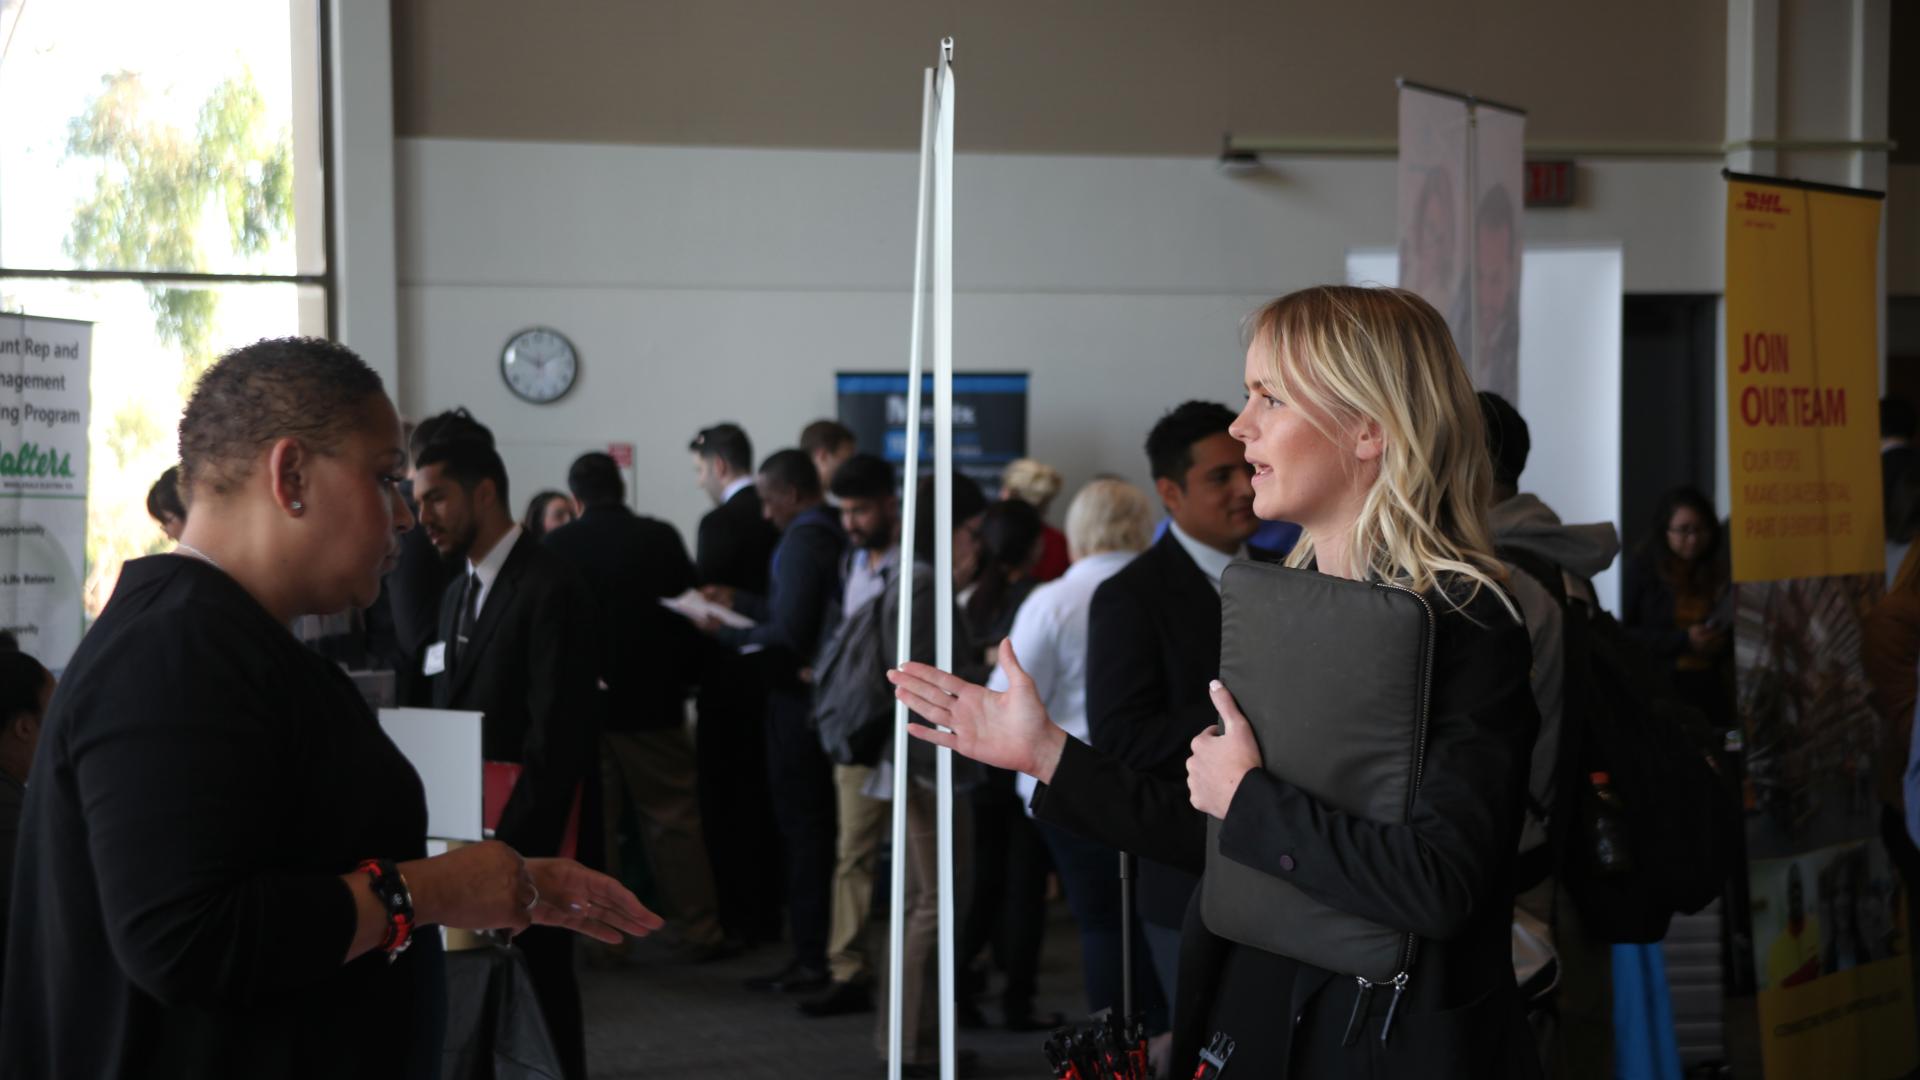 Students and employees at the Business and Healthcare Spring 2018 Job and Internship Fair